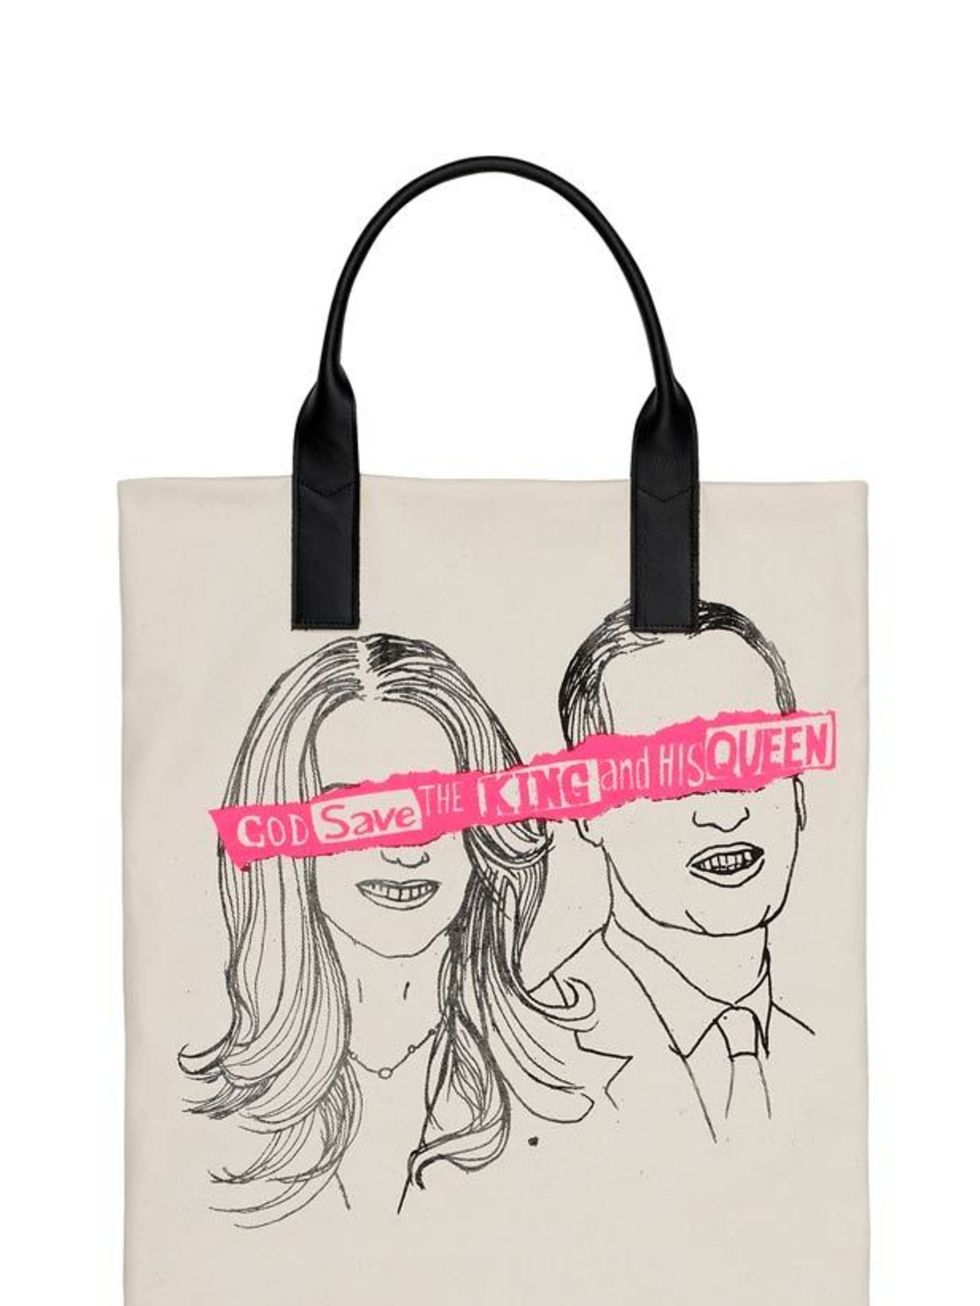 <p>Commemorate the Royal wedding with a kitsch tote by the master of uber-cool prints, Simeon Farrer Simeon Farrar Royal Wedding printed tote bag, £85, at <a href="http://www.liberty.co.uk/fcp/product/Liberty/Simeon-Farrar/Royal-Wedding-Tote-Bag-Simeon-F